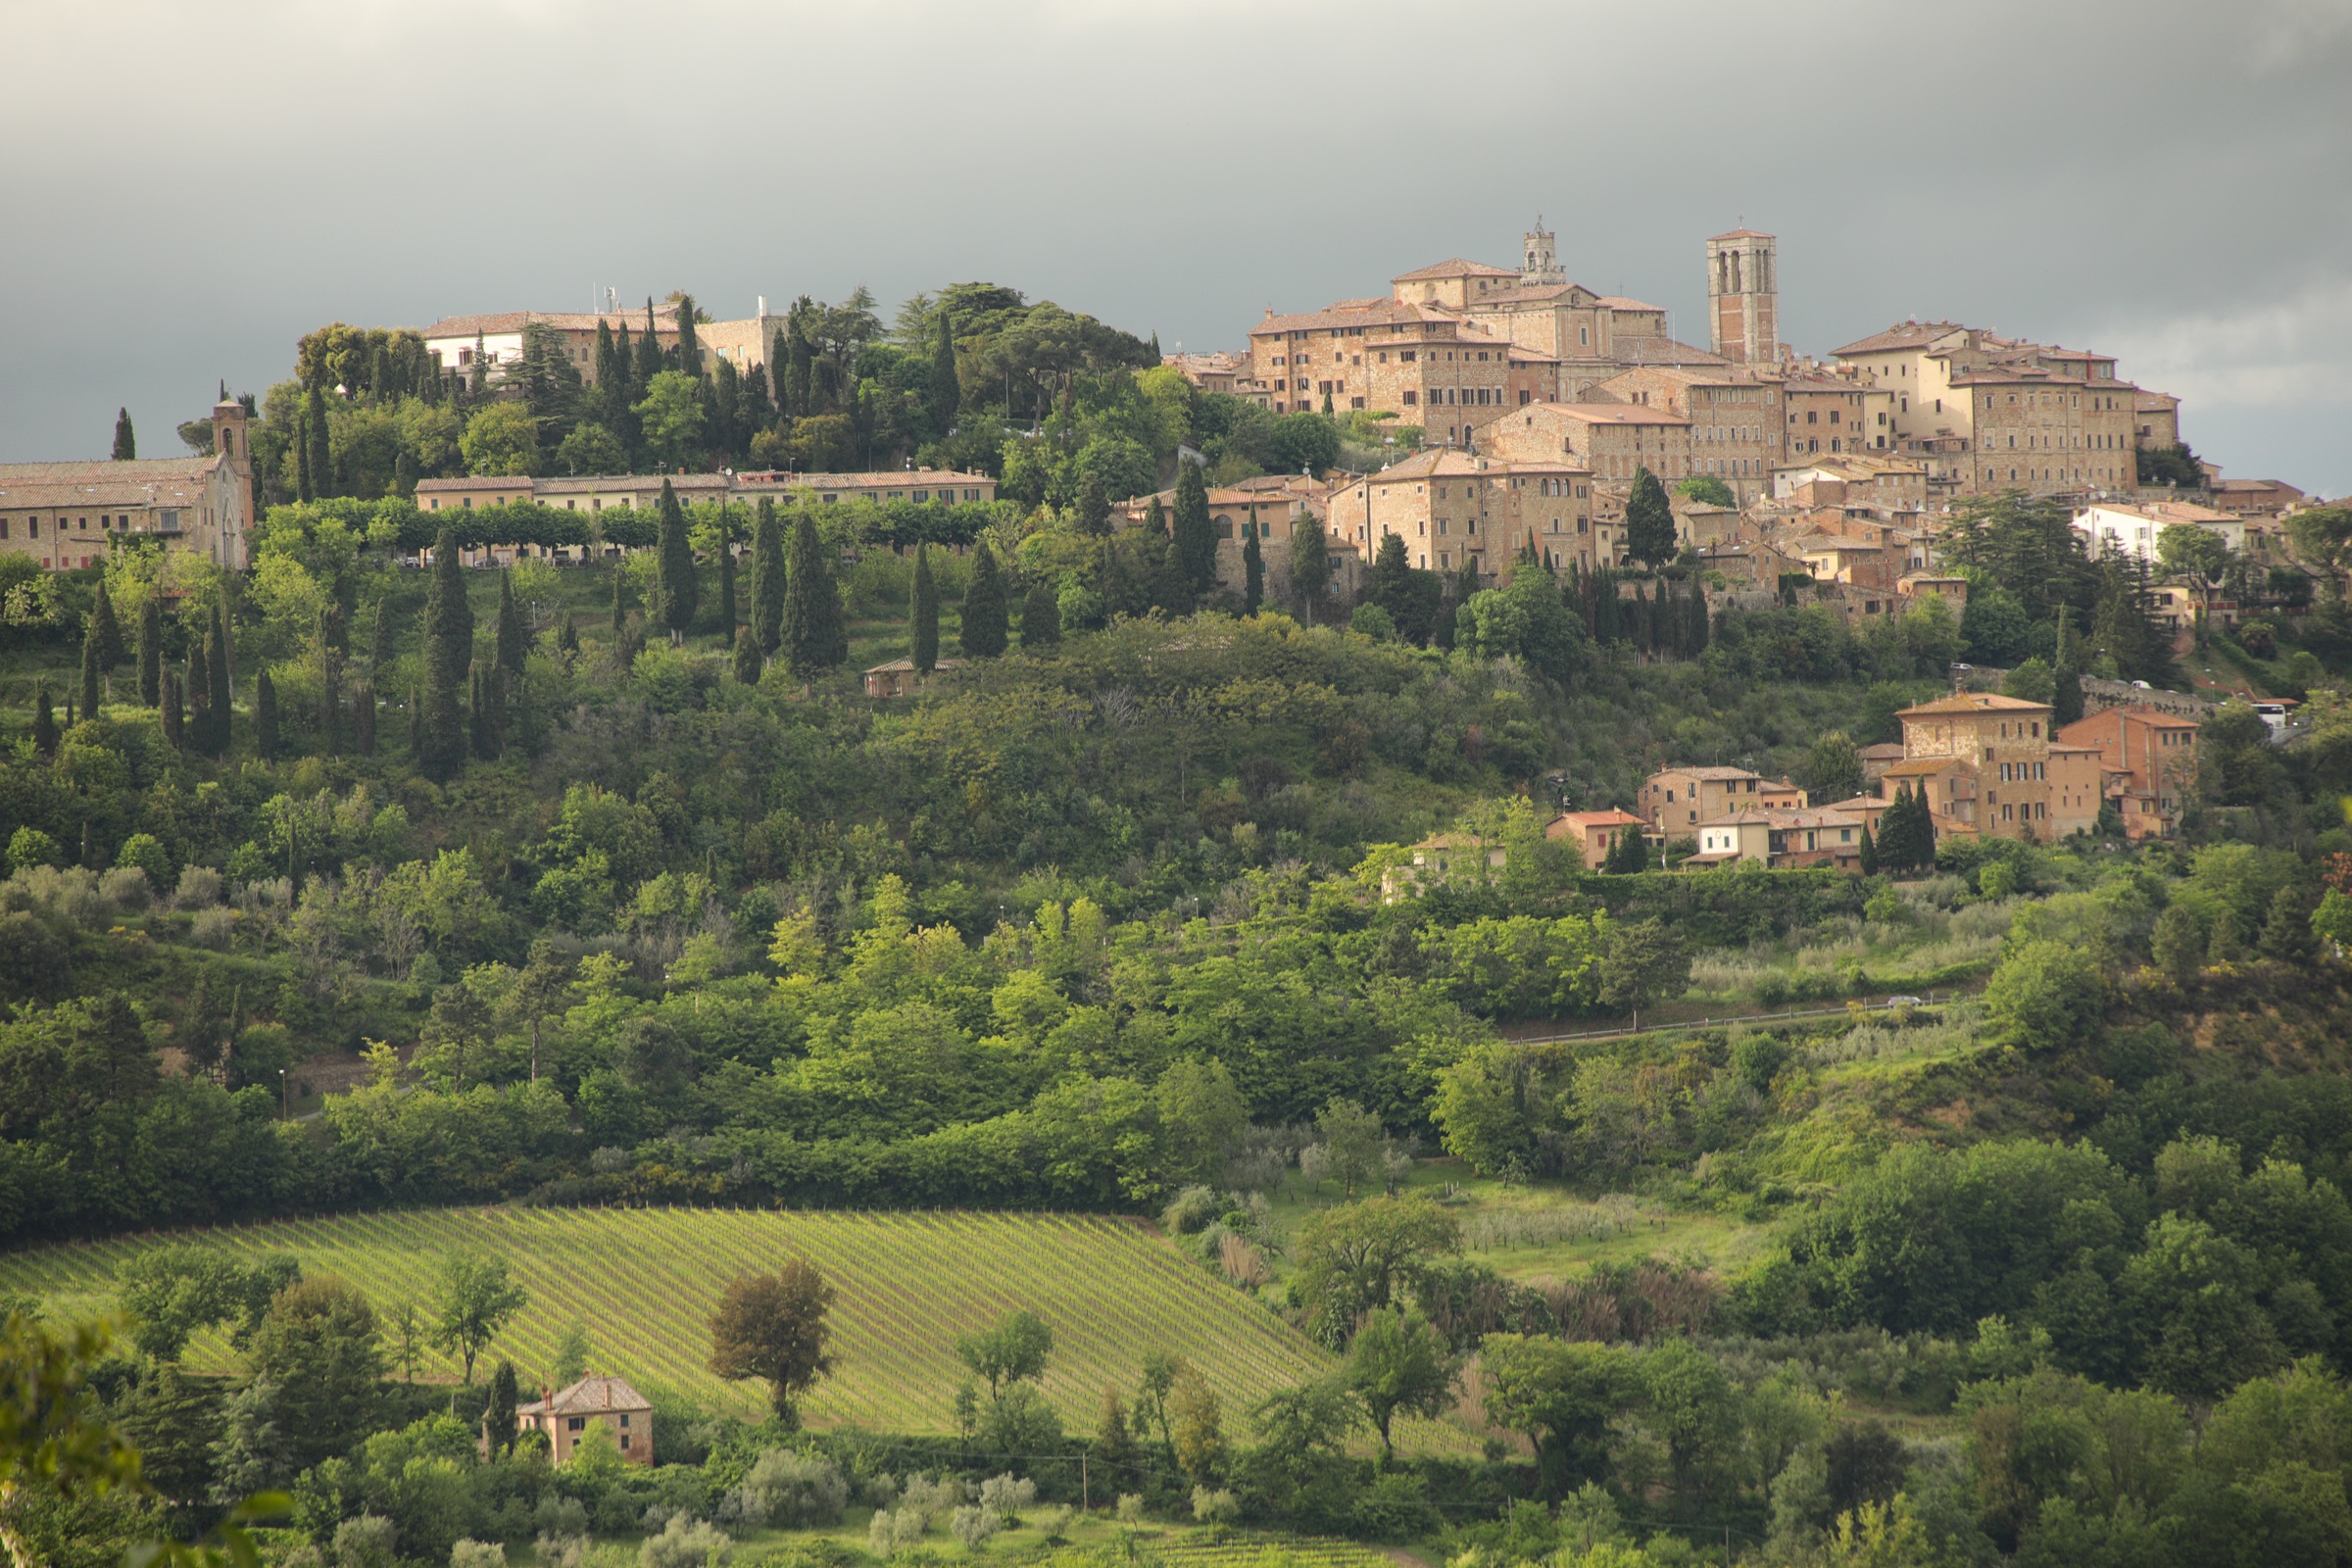 Tuscany Italy photo tour with Don Mammoser